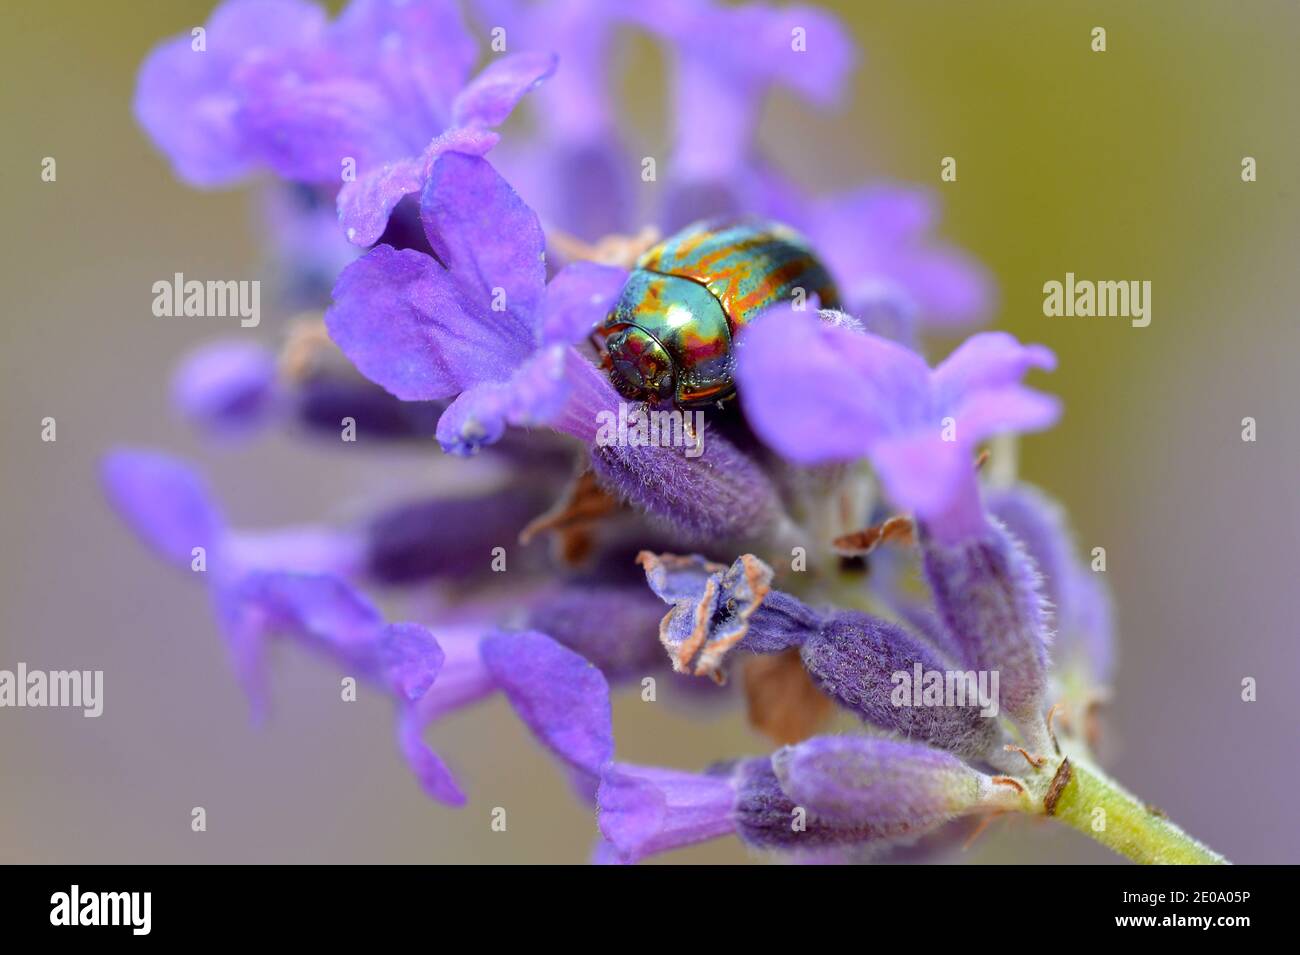 A colourful Rosemary Beetle on a Lavender plant Stock Photo